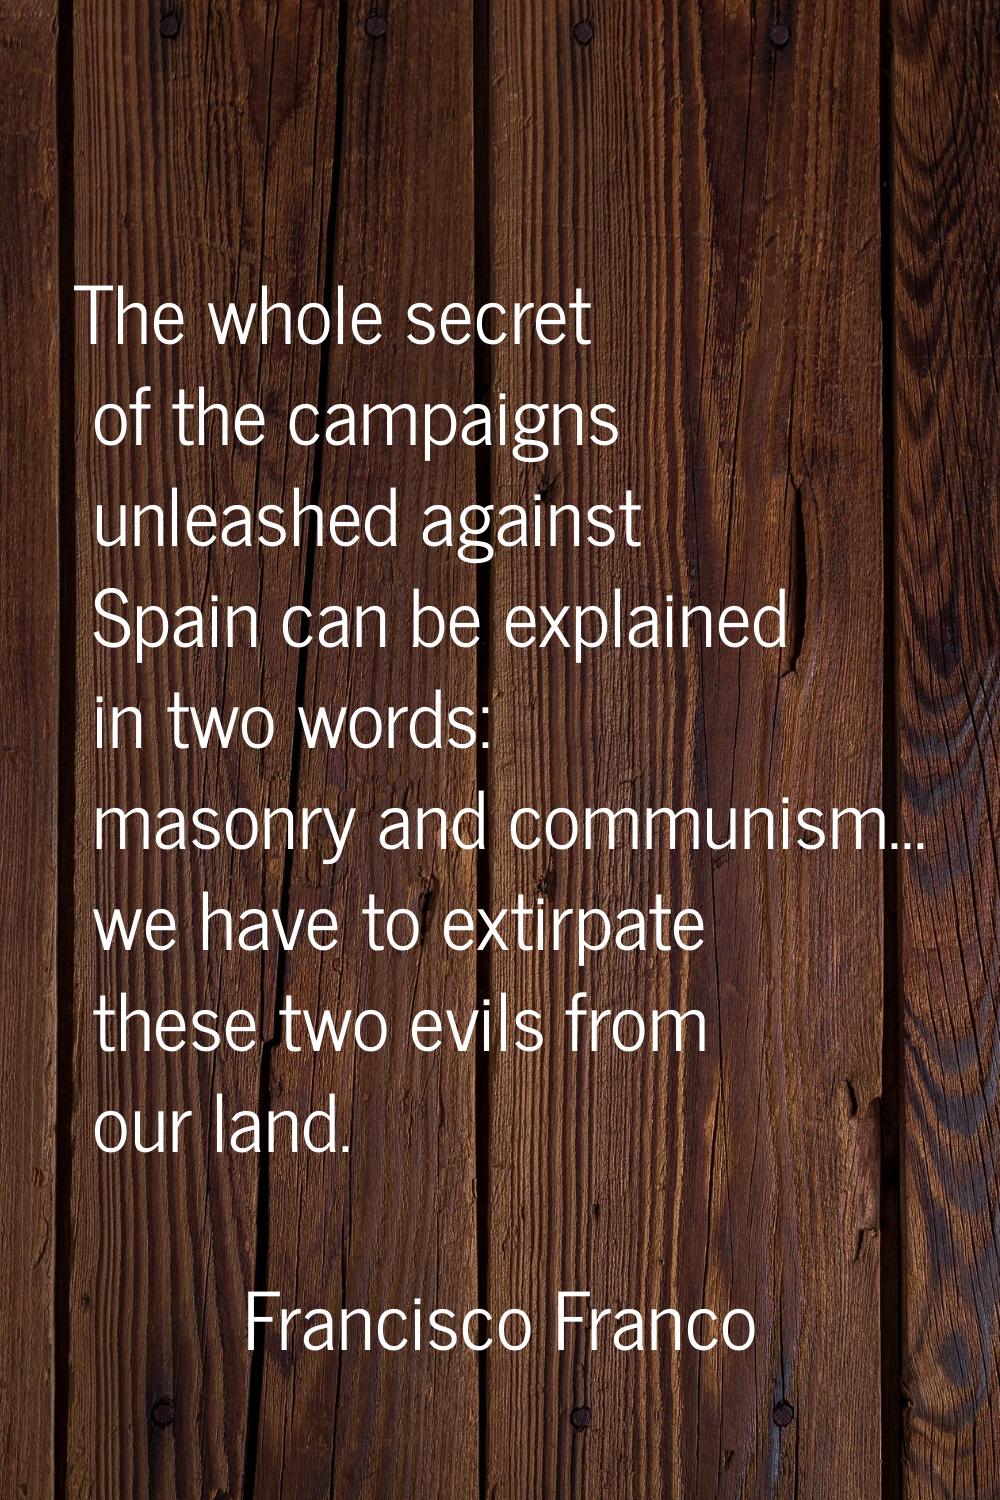 The whole secret of the campaigns unleashed against Spain can be explained in two words: masonry an